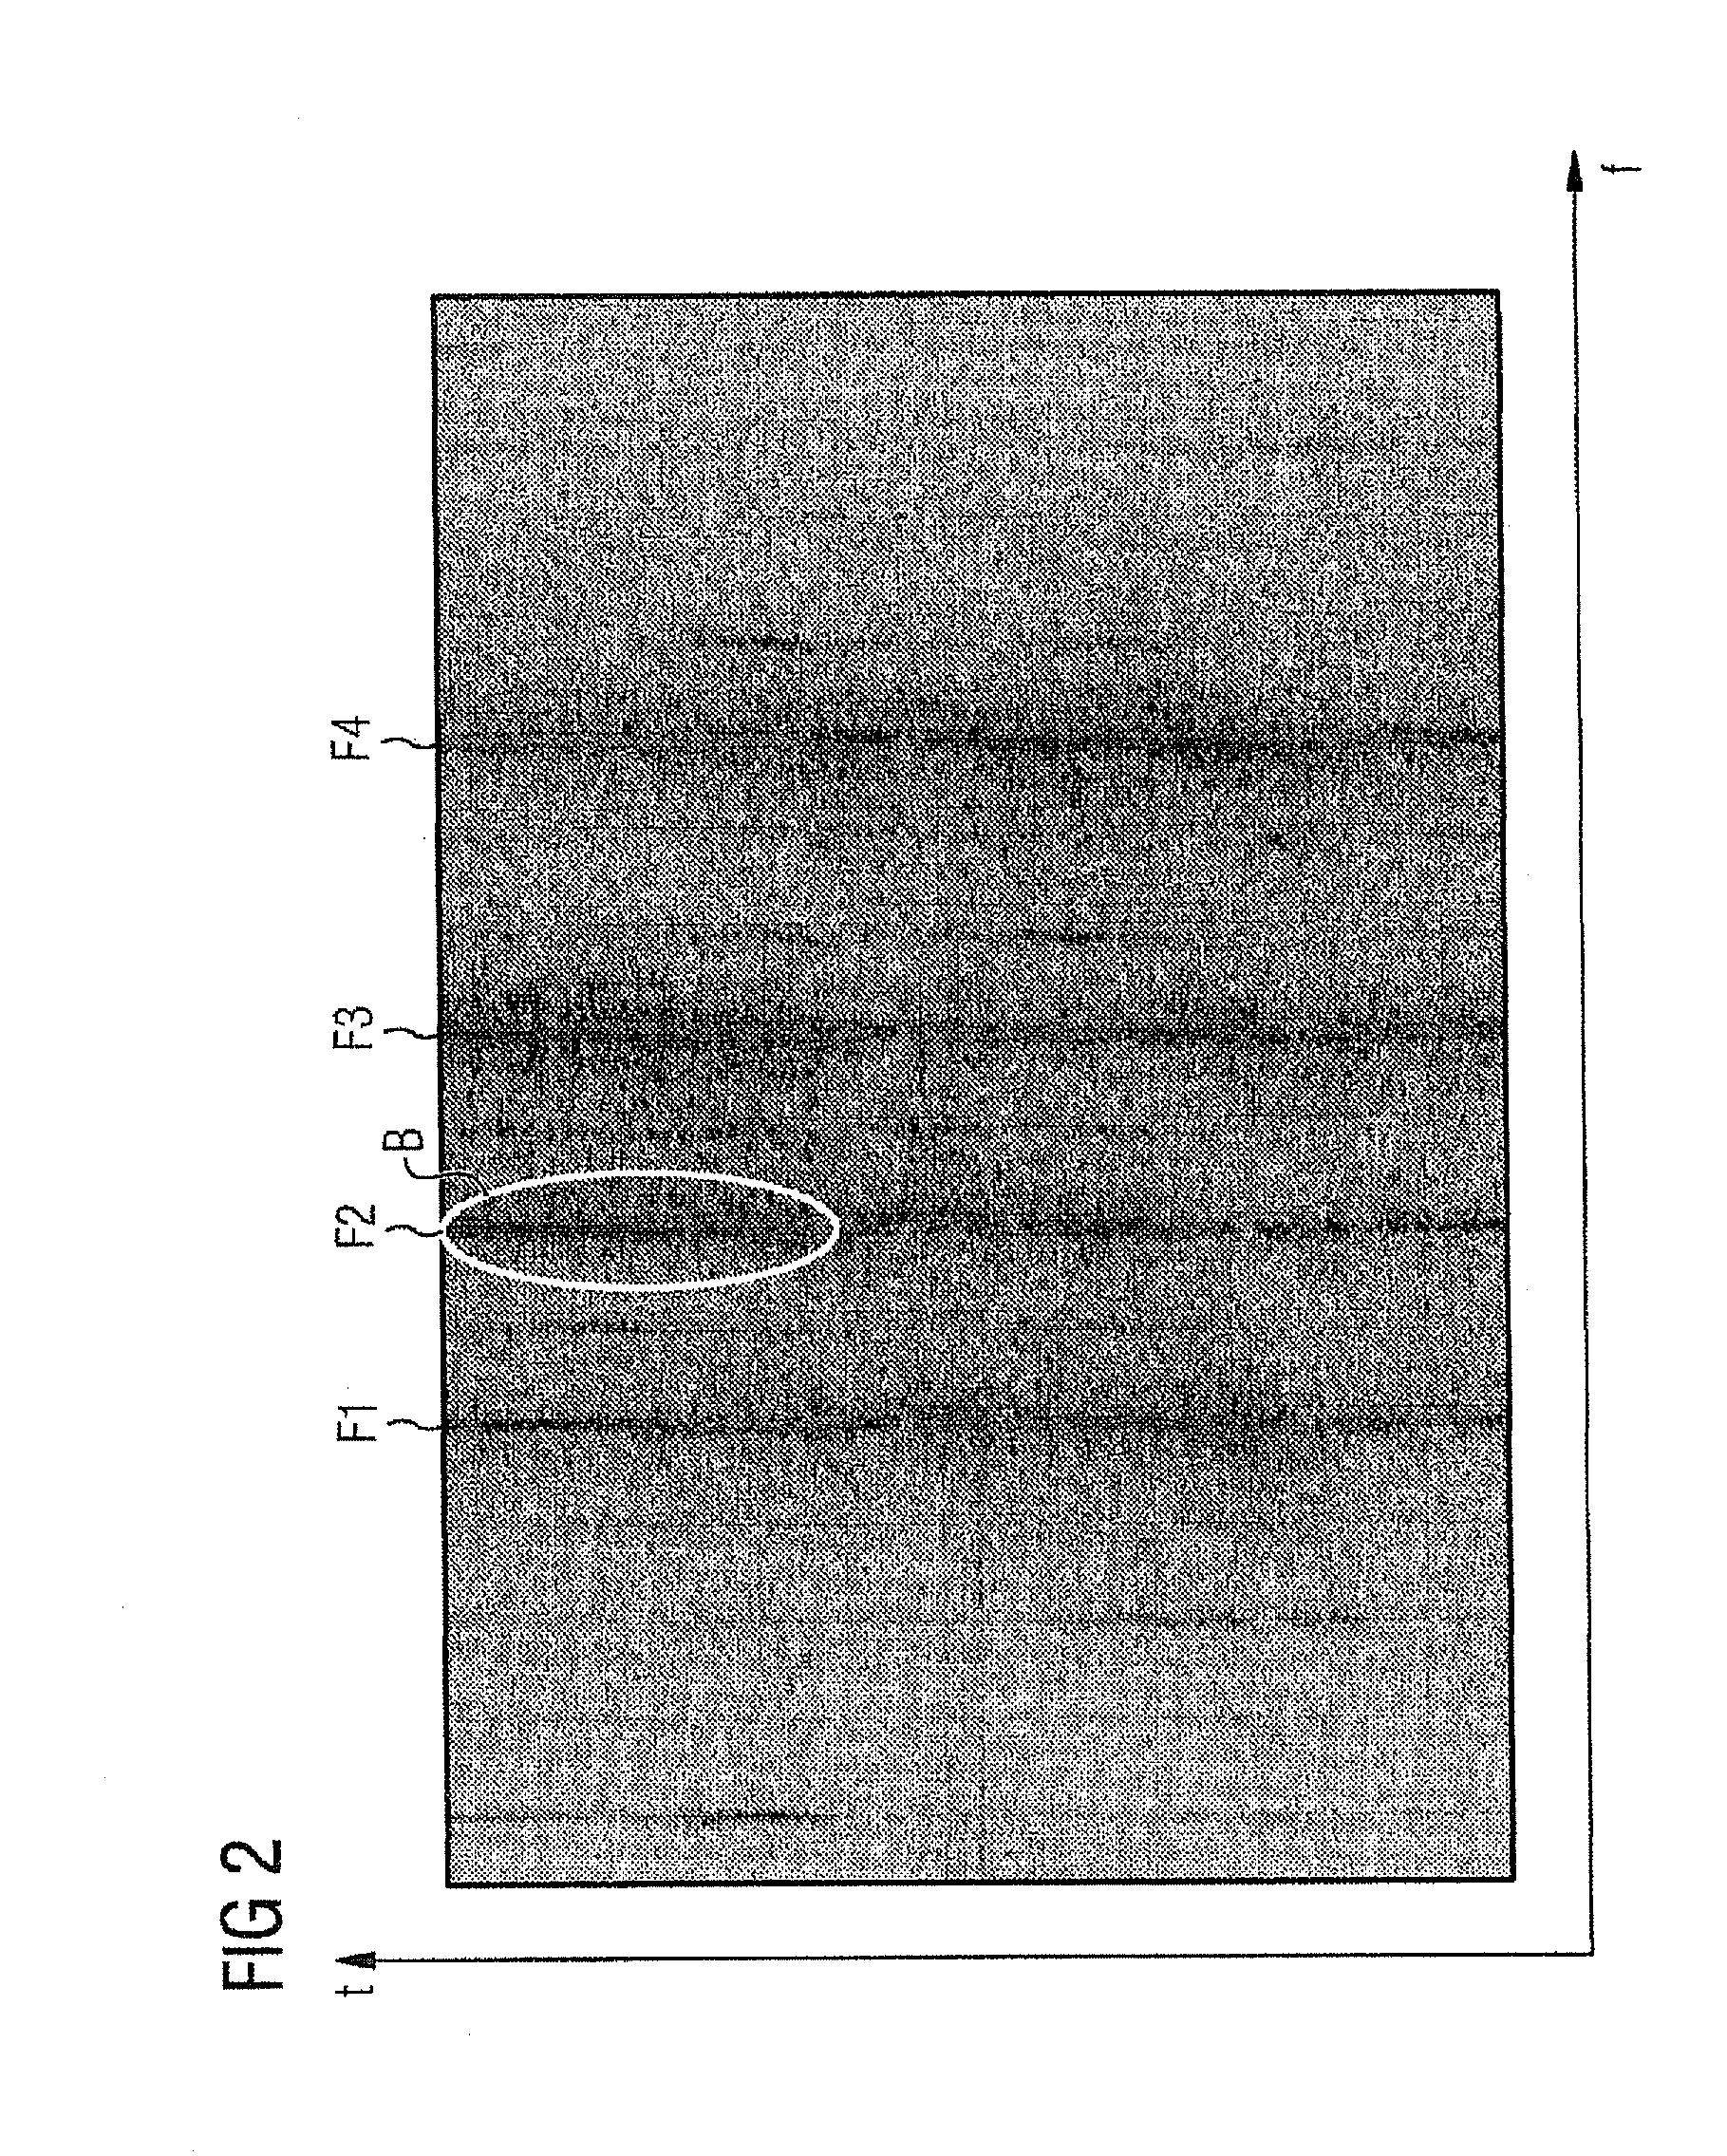 Method for analysis of the operation of a gas turbine